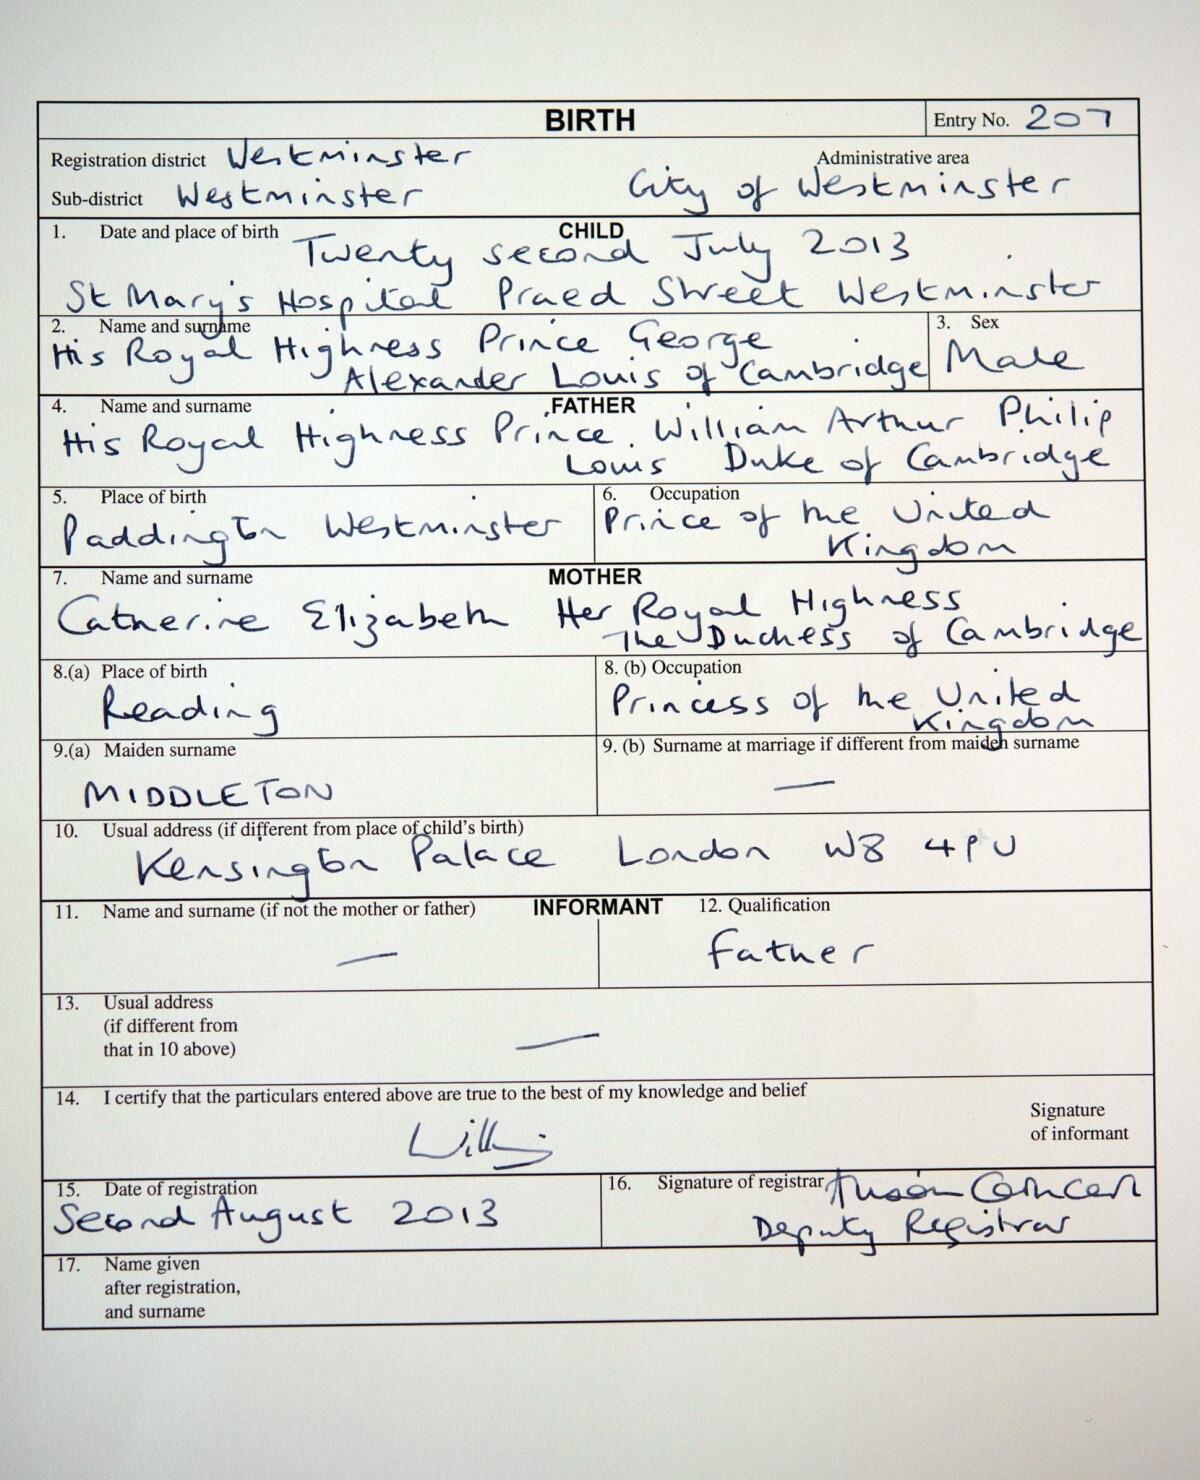 This picture shows the birth registration for Prince George of Cambridge, after the birth registration formalities were completed in London on August 2, 2013.